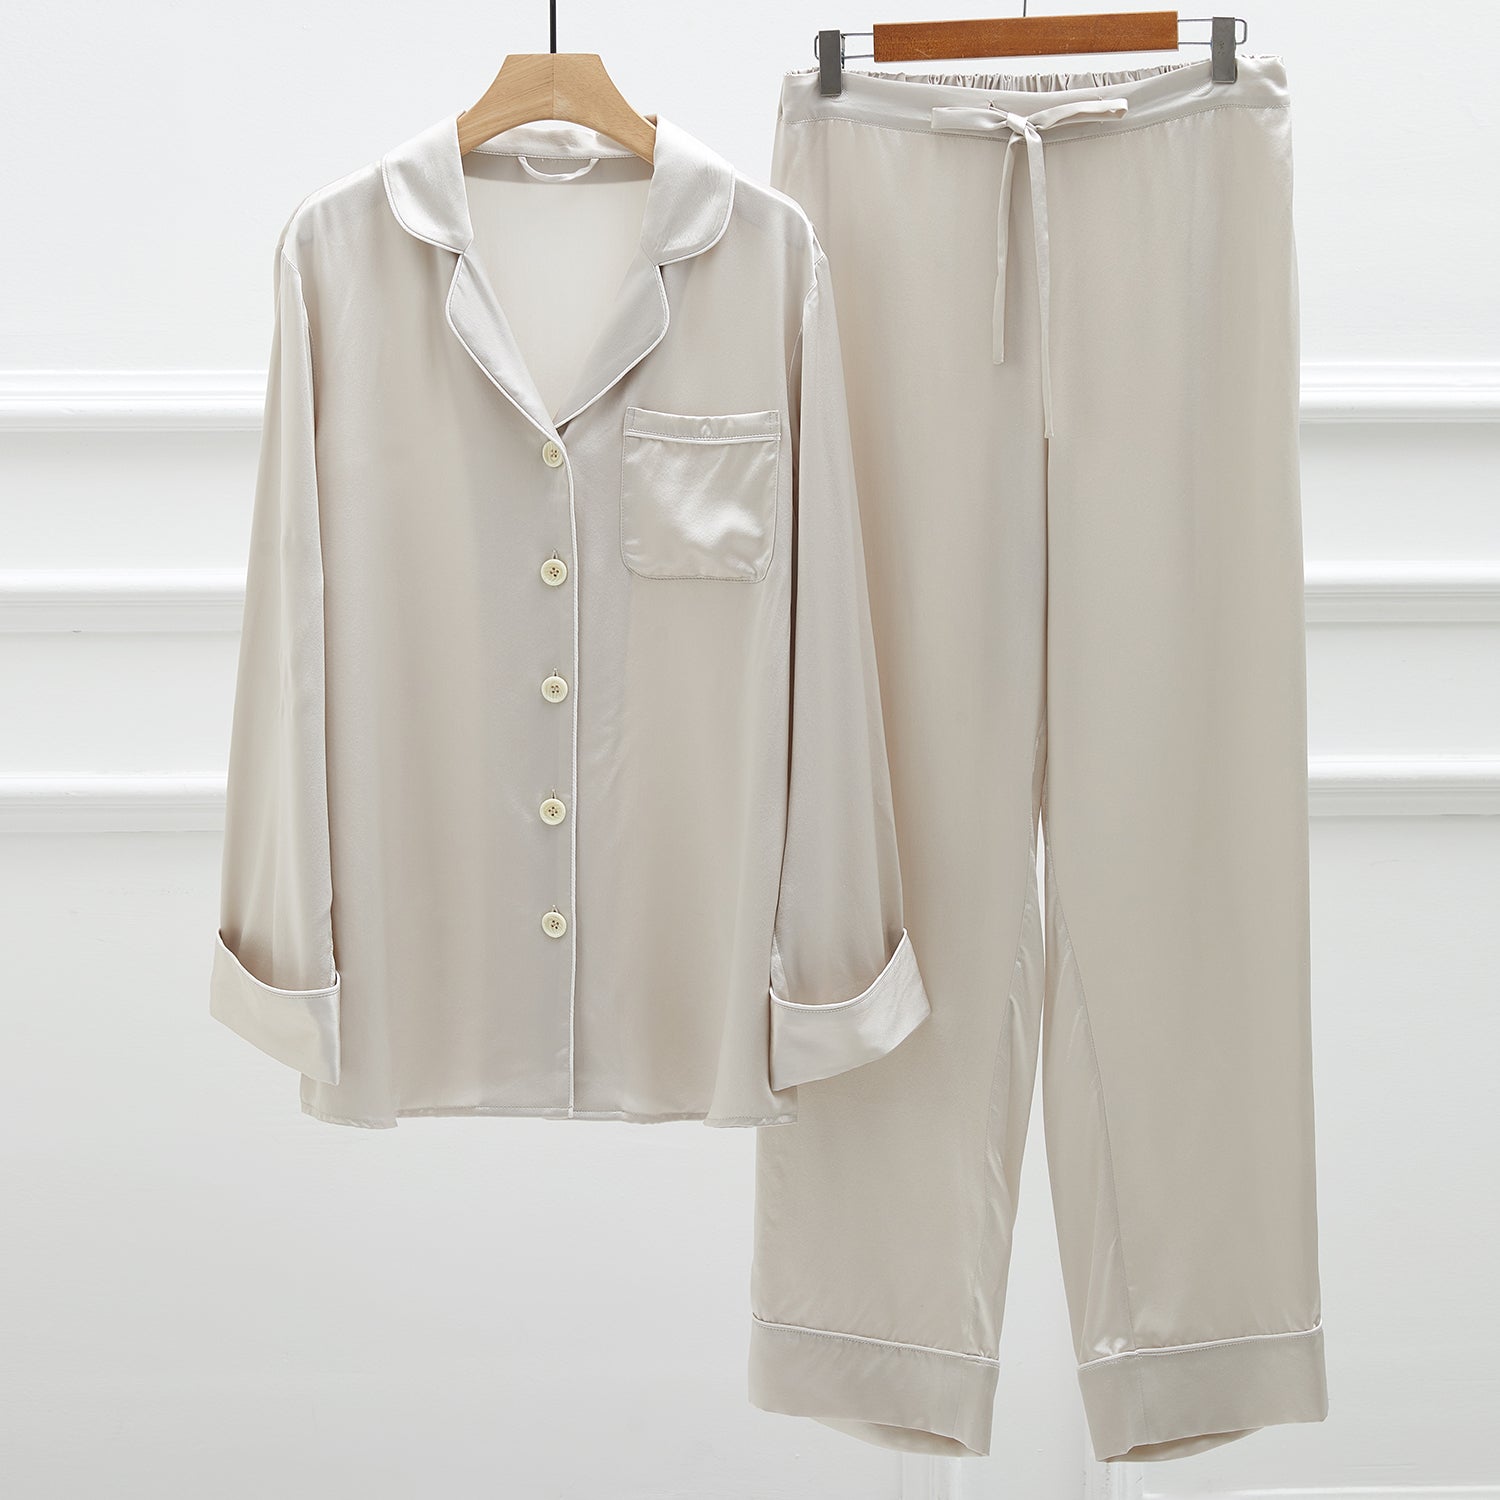 Cotton Sateen Pajama Set with Contrast Piping - Cream/Terra